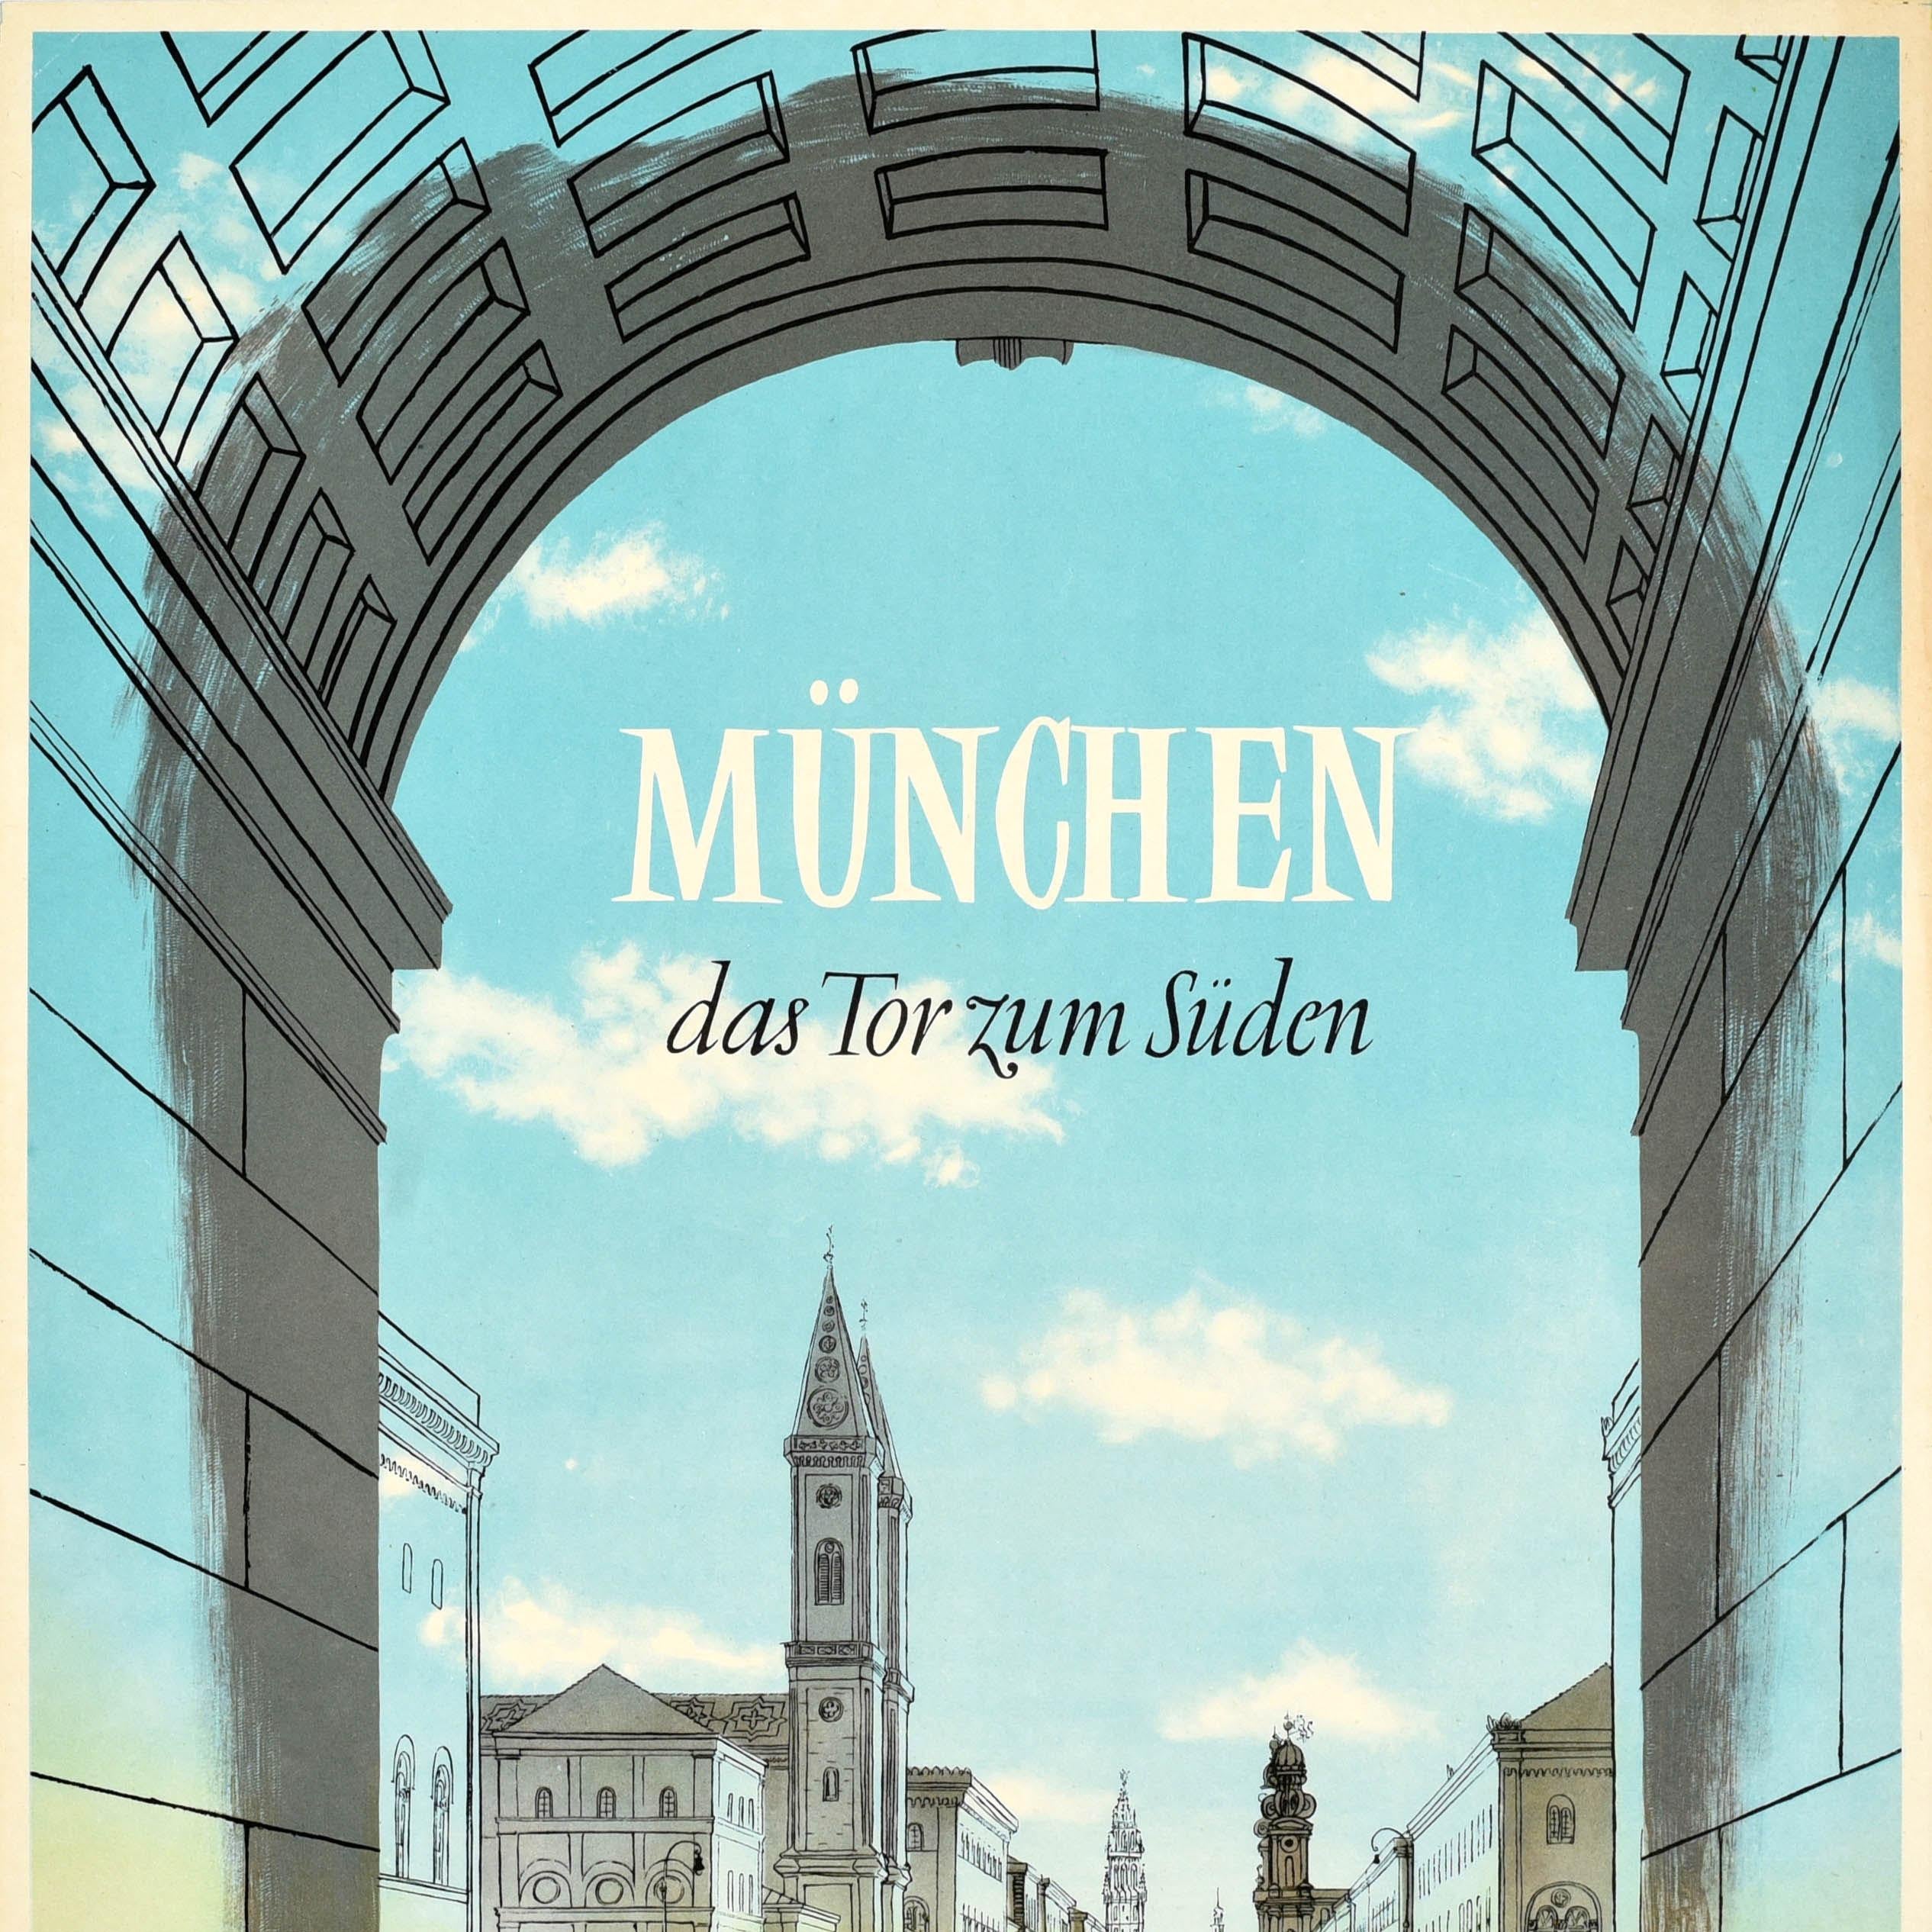 Original vintage Germany travel poster - Munchen Das Tor zum Suden / Munich The Gateway to the South - featuring a view of bikes and cars driving through a stone arch of the historic 1852 Siegestor / Victory Gate on Ludwigstrasse with people walking